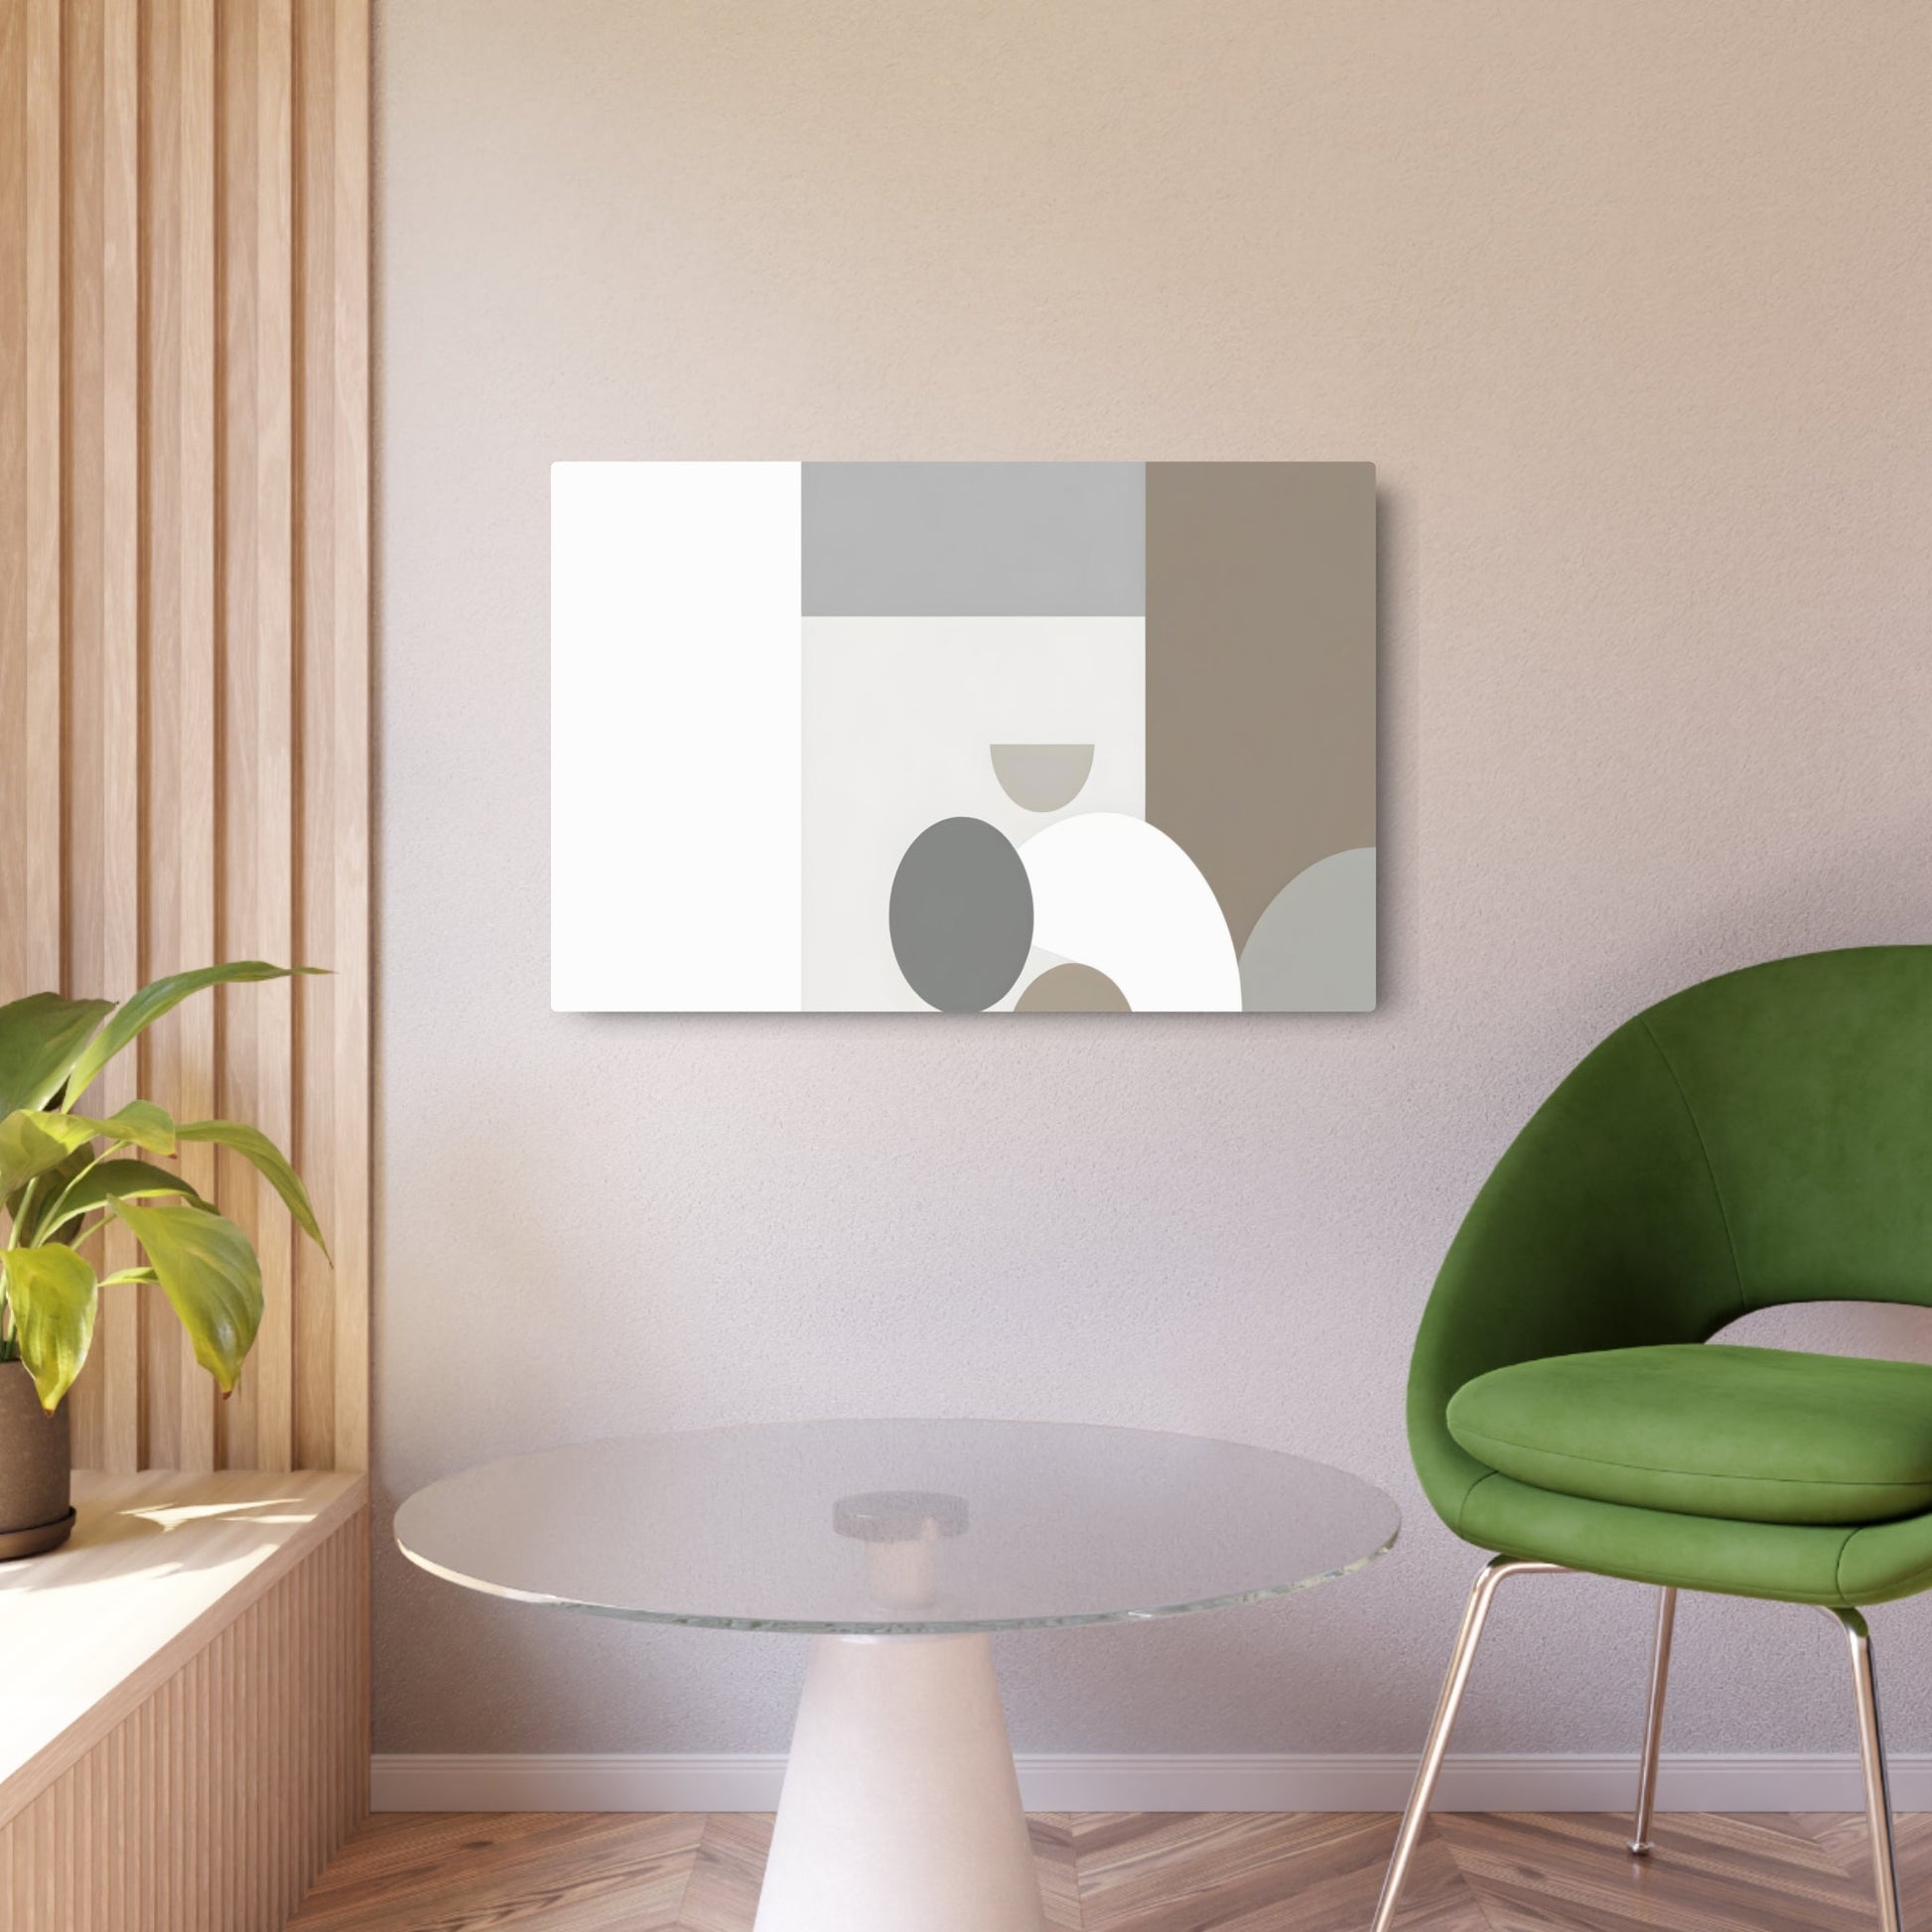 Metal Poster Art | "Modern Minimalist Art Piece in Neutral Colors - Simple Shapes and Emphasized Space - Contemporary Style Minimalism Decor" - Metal Poster Art 36″ x 24″ (Horizontal) 0.12''